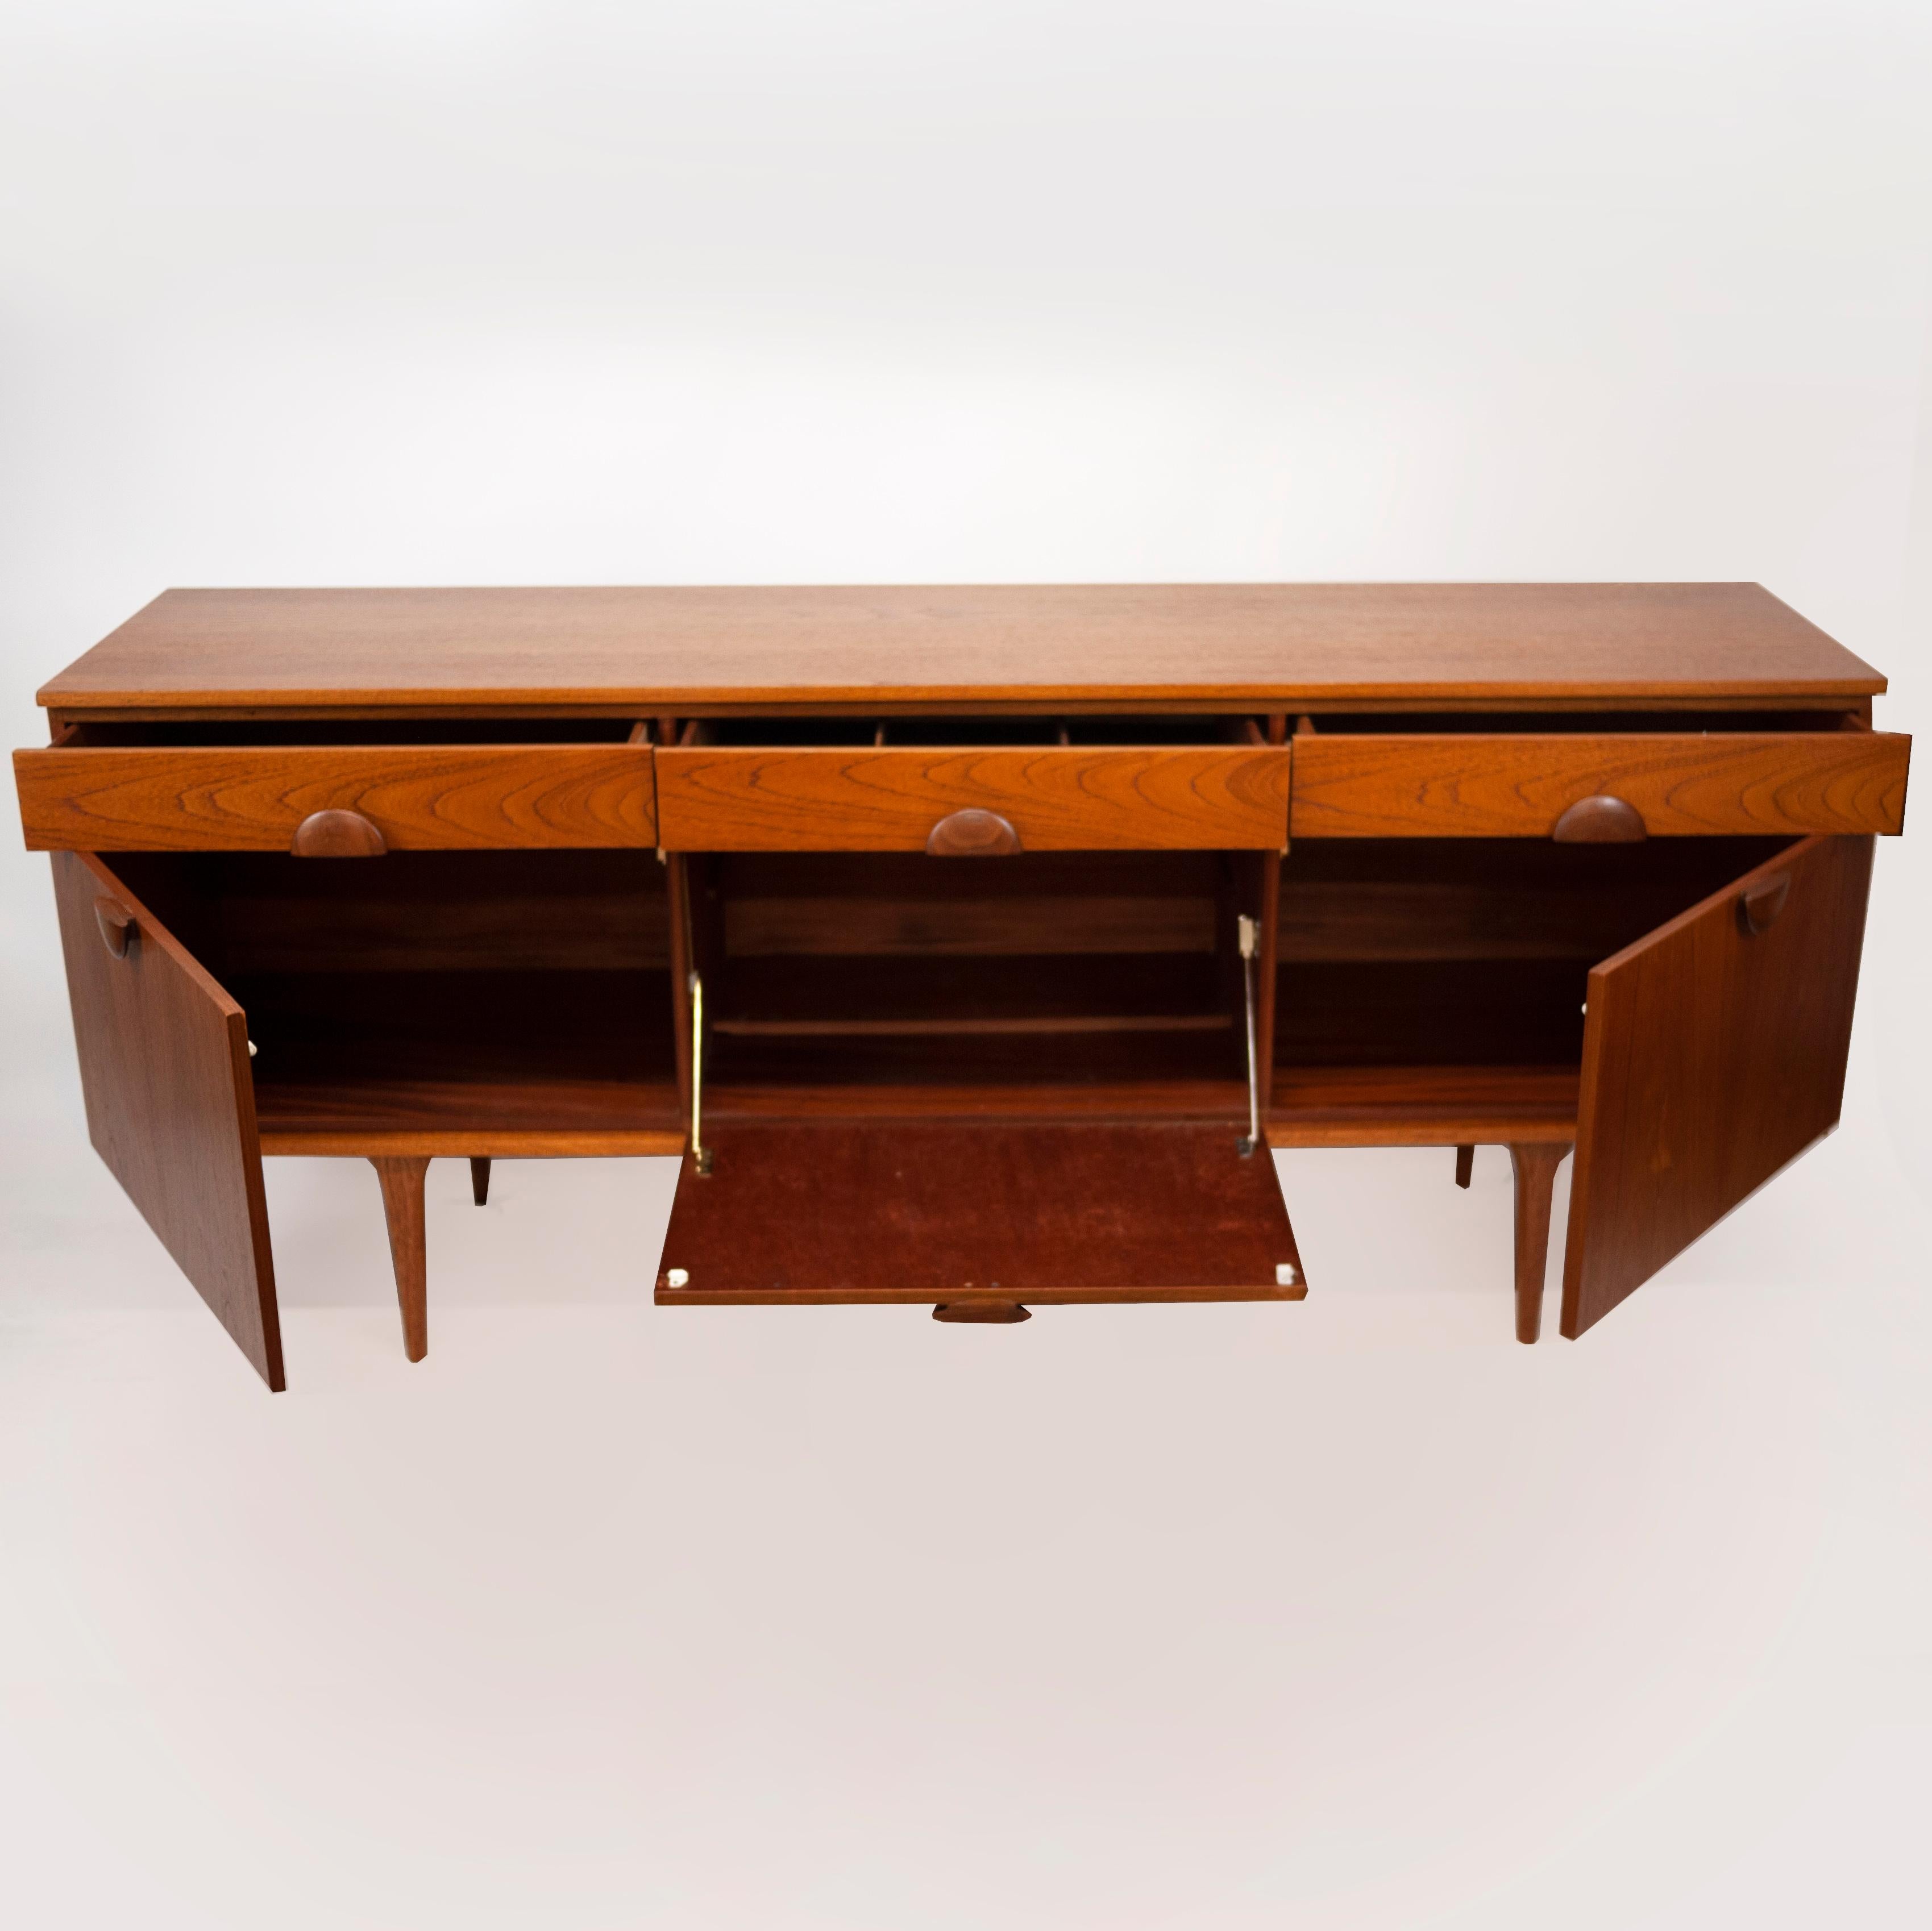 A vintage teak sideboard from the 1960s. The sideboard features 3 top drawers and 3 lower cupboards.

Manufacturer - Unknown

Design Period - 1960 to 1969

Country of Manufacture - U.K

Style - Mid-Century

Detailed Condition - Good with